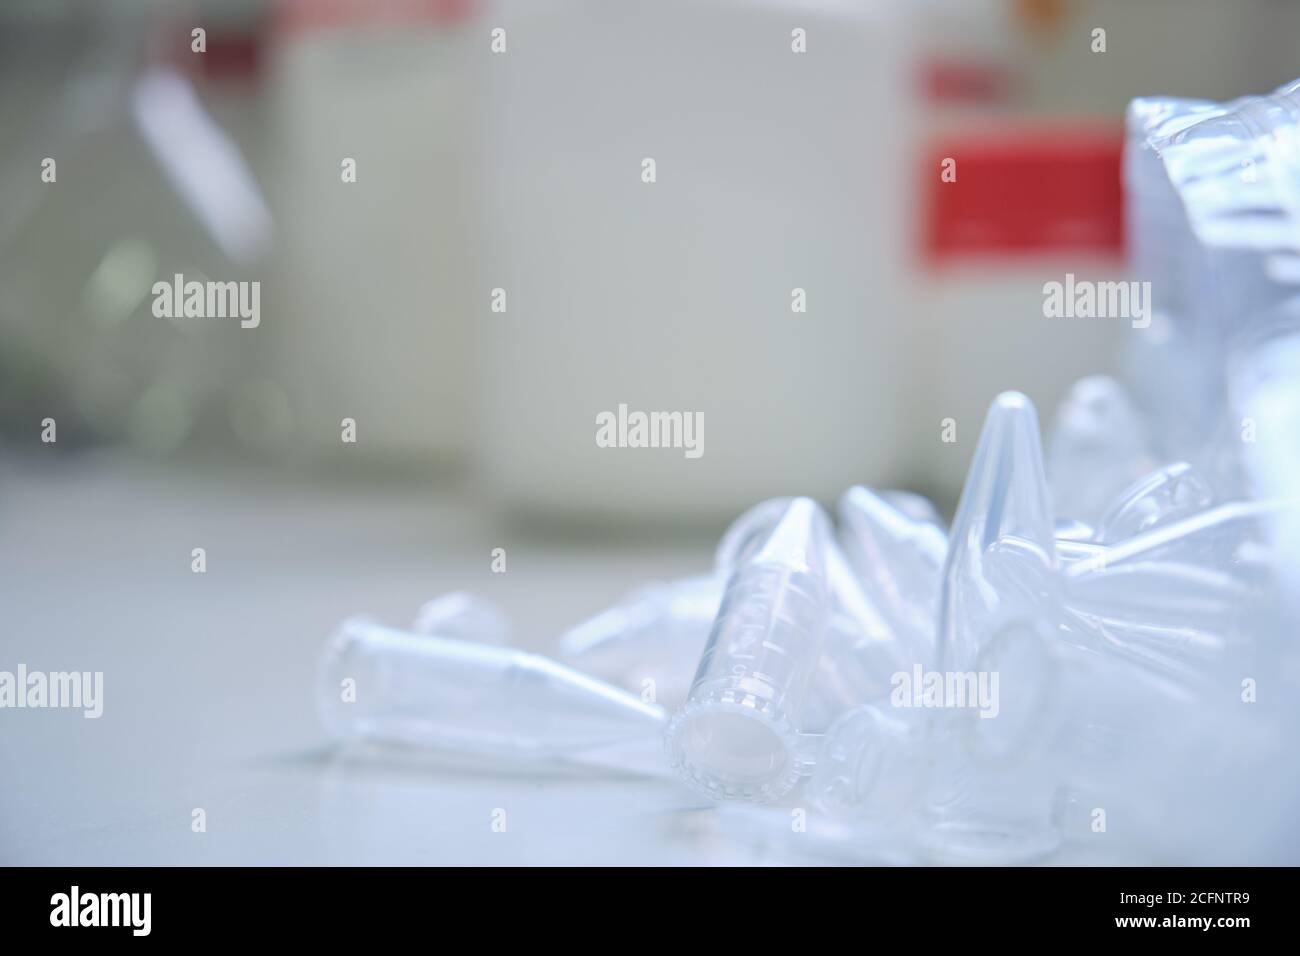 Laboratory eppendorf tubes on a table. Laboratory material. Stock Photo